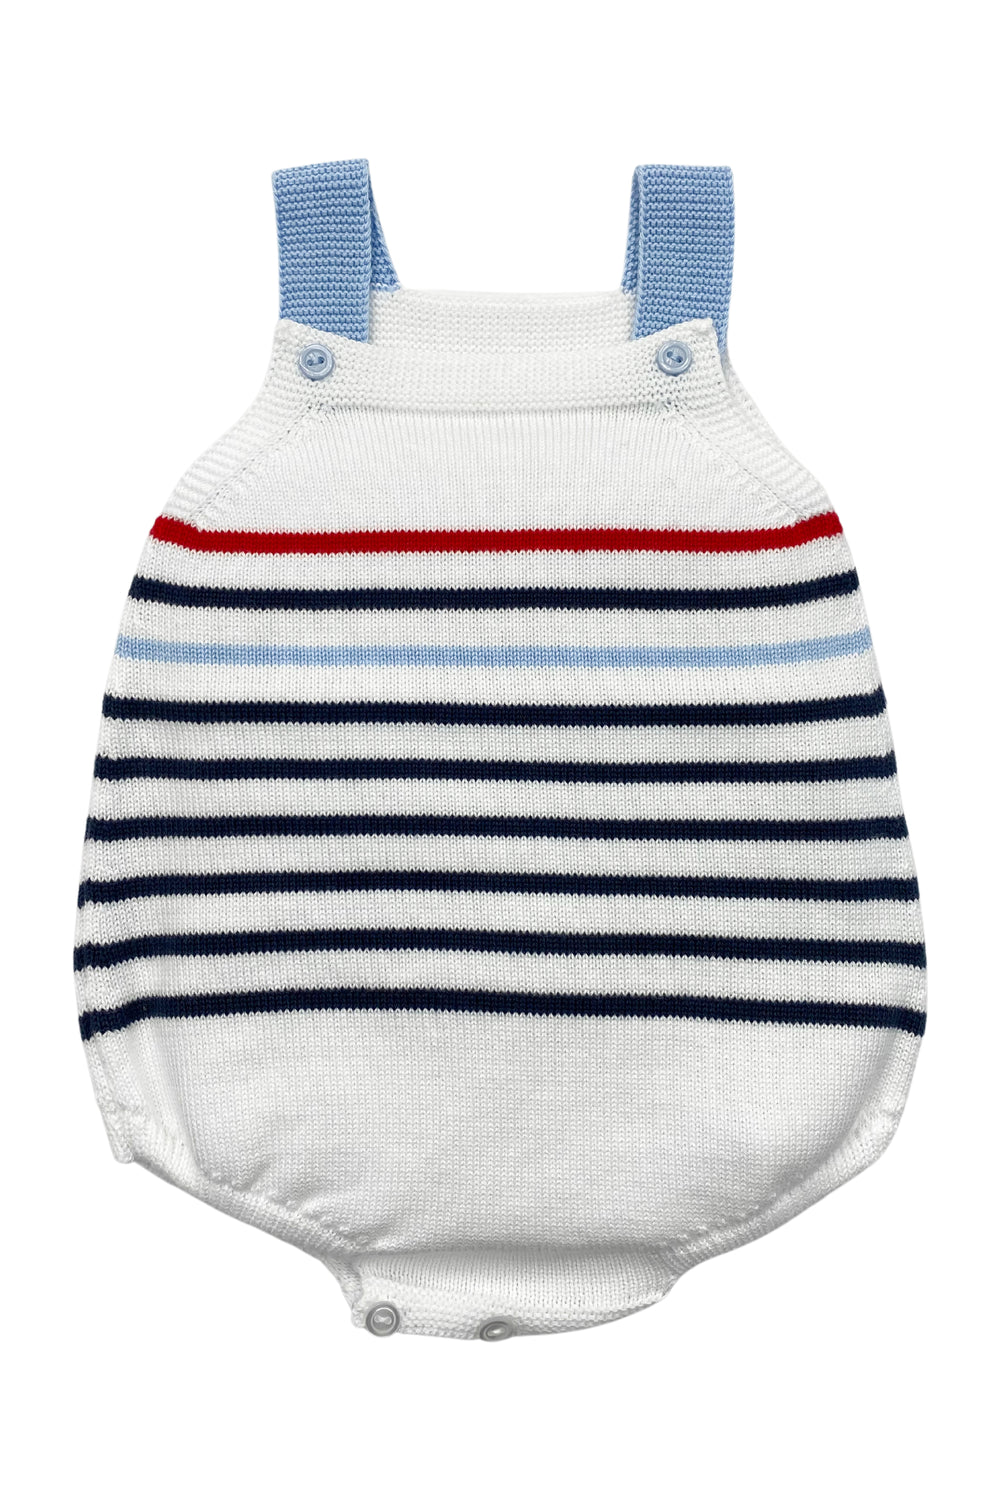 Granlei "Archer" Navy & Red Stripe Knit Dungaree Romper | Millie and John